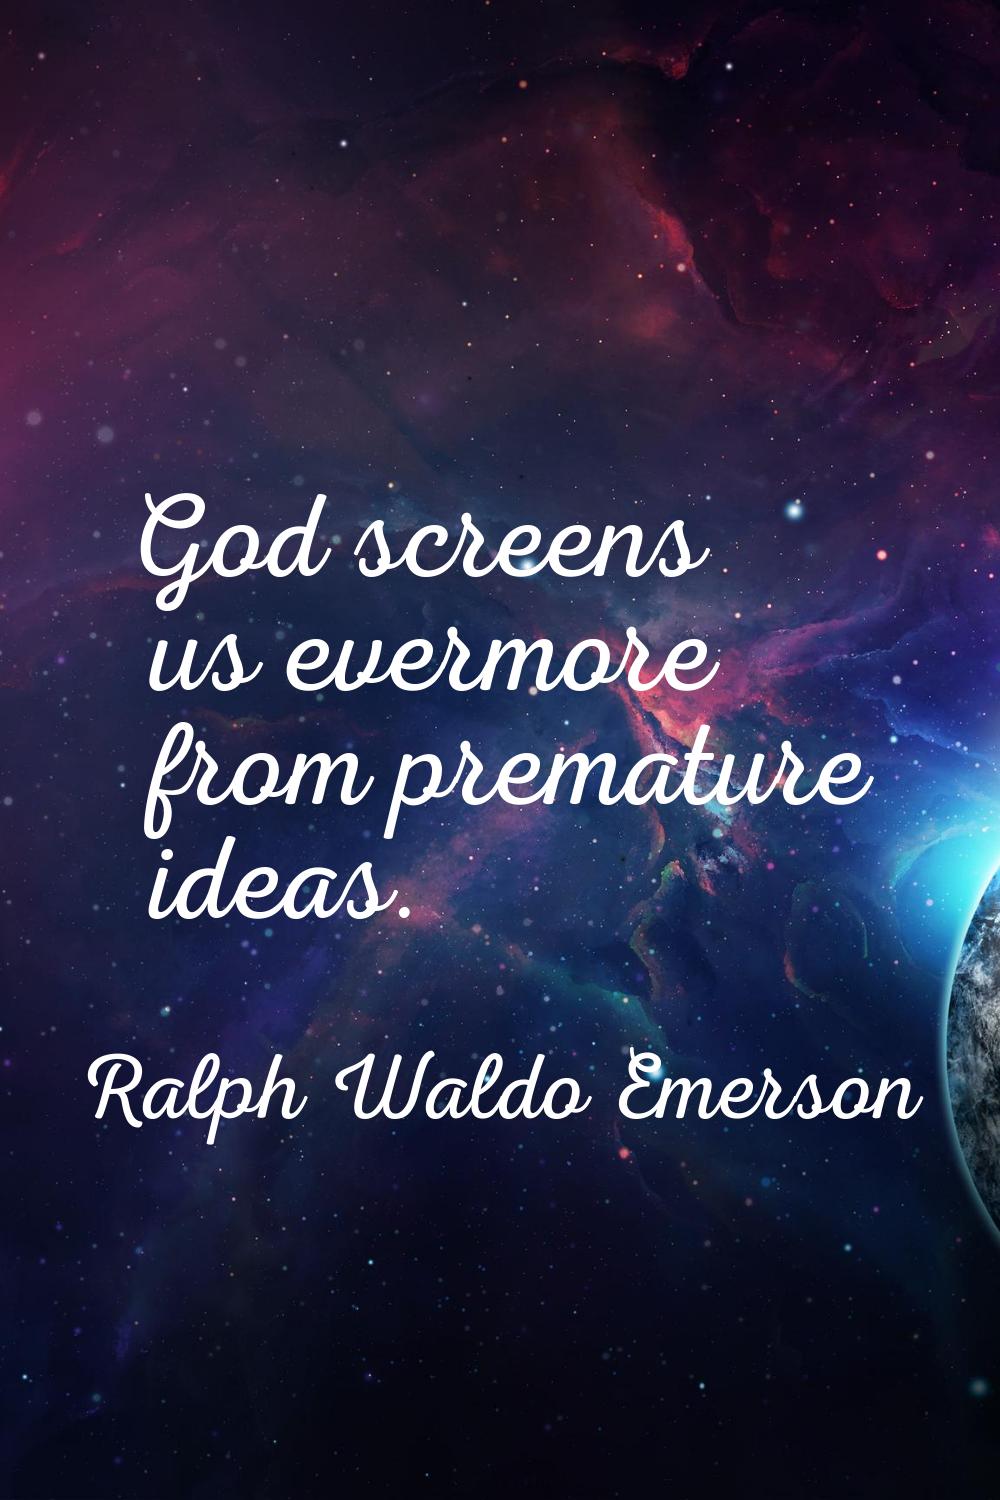 God screens us evermore from premature ideas.